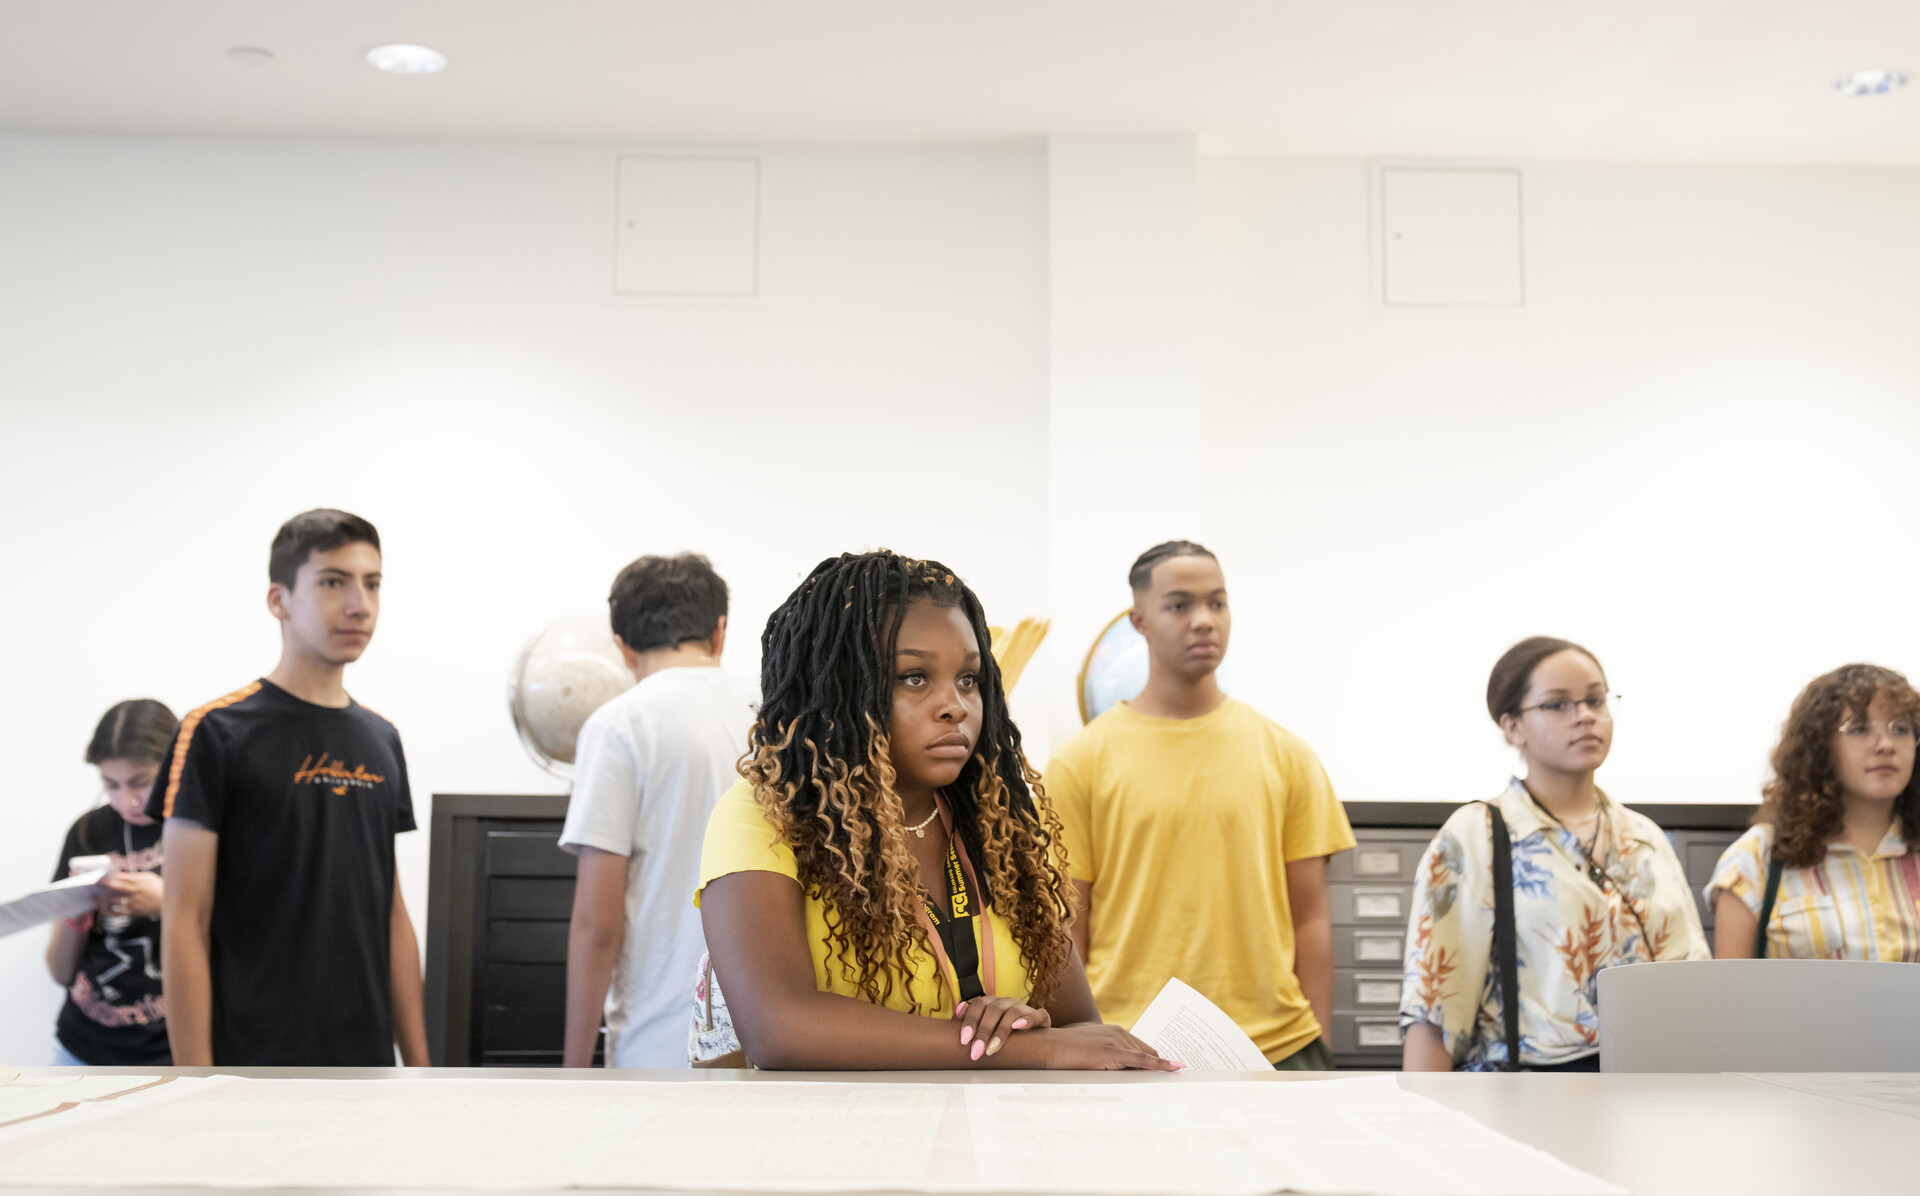 Stroud Scholars attend an orientation for Tutt Library. From left to right: Alan Ventura Duran, Stevani Mahoney, Geoffrey Dunn, Tylah Stewart, and Adalee Campbell. Photo by Lonnie Timmons III / Colorado College. 